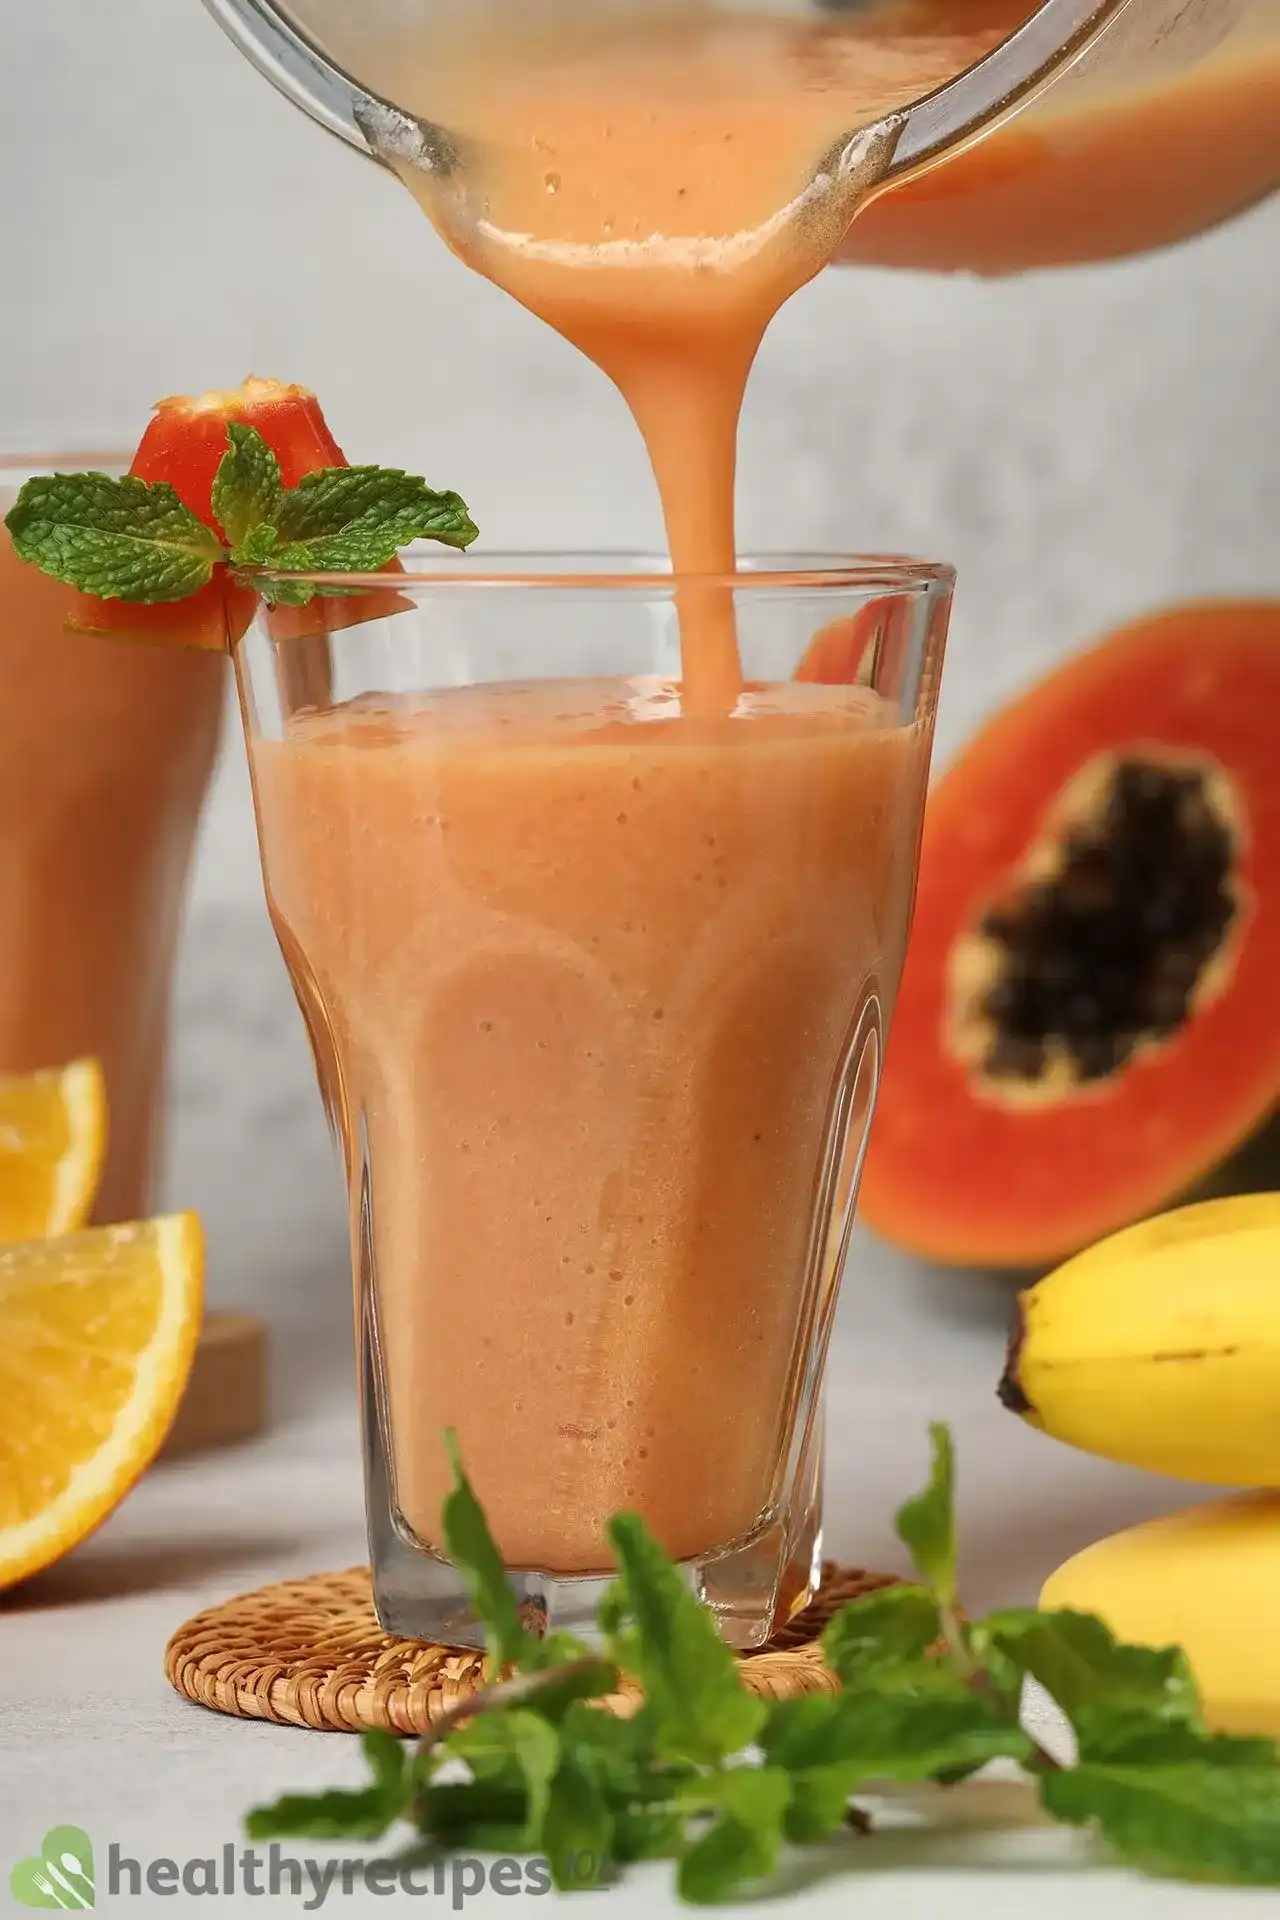 Banana Papaya Smoothie Recipe: A Guilt-Free Pleasure in Disguise